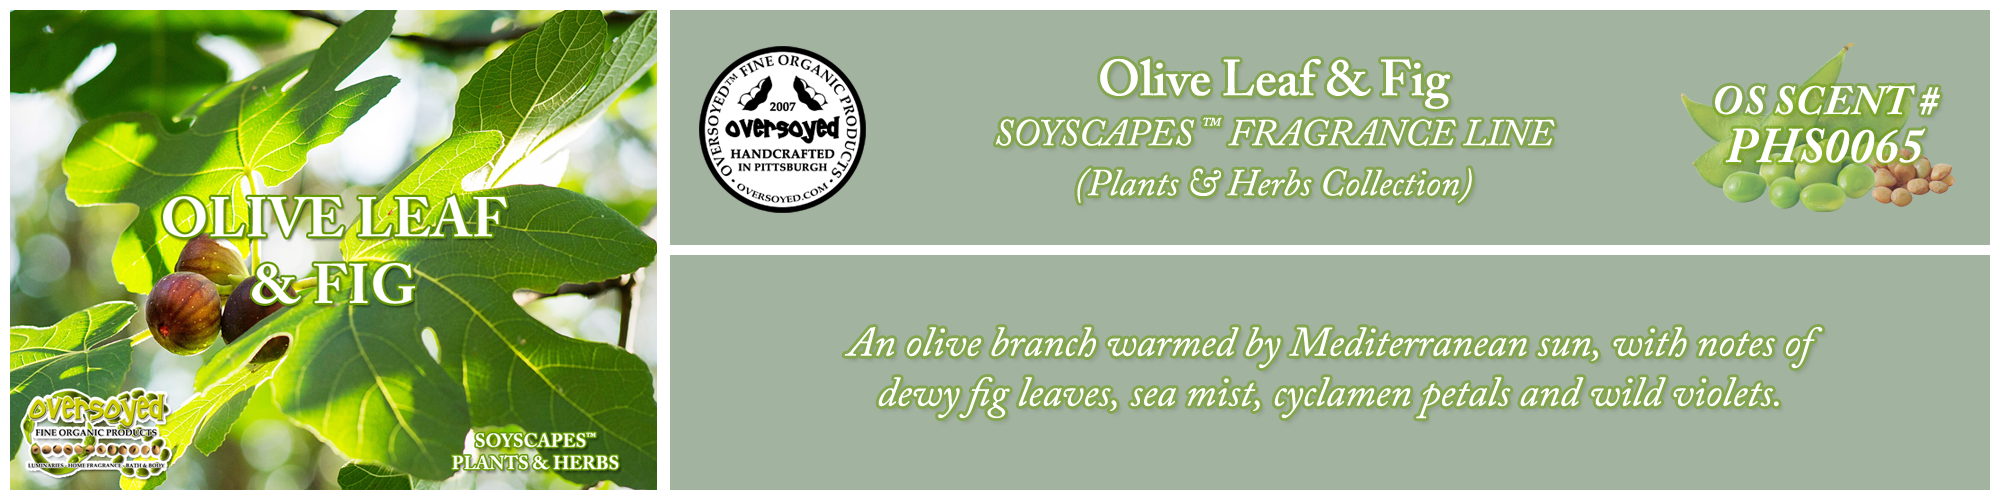 Olive Leaf & Fig Handcrafted Products Collection